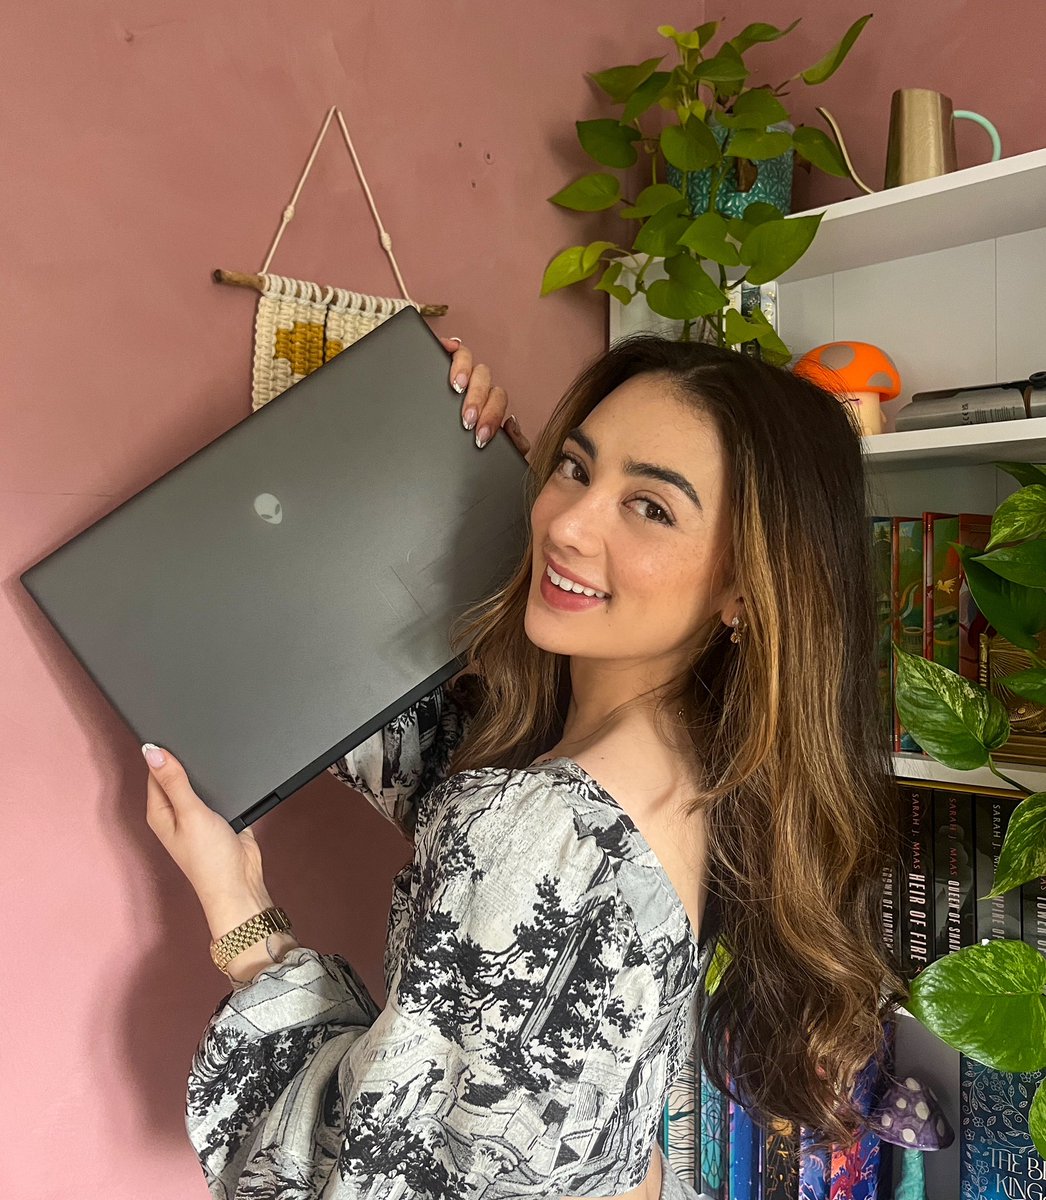 Live now playing Elden Ring on the Alienware x16 R2 👽 Come join the stream to see how amazing the game looks! @AlienwareUK #ad